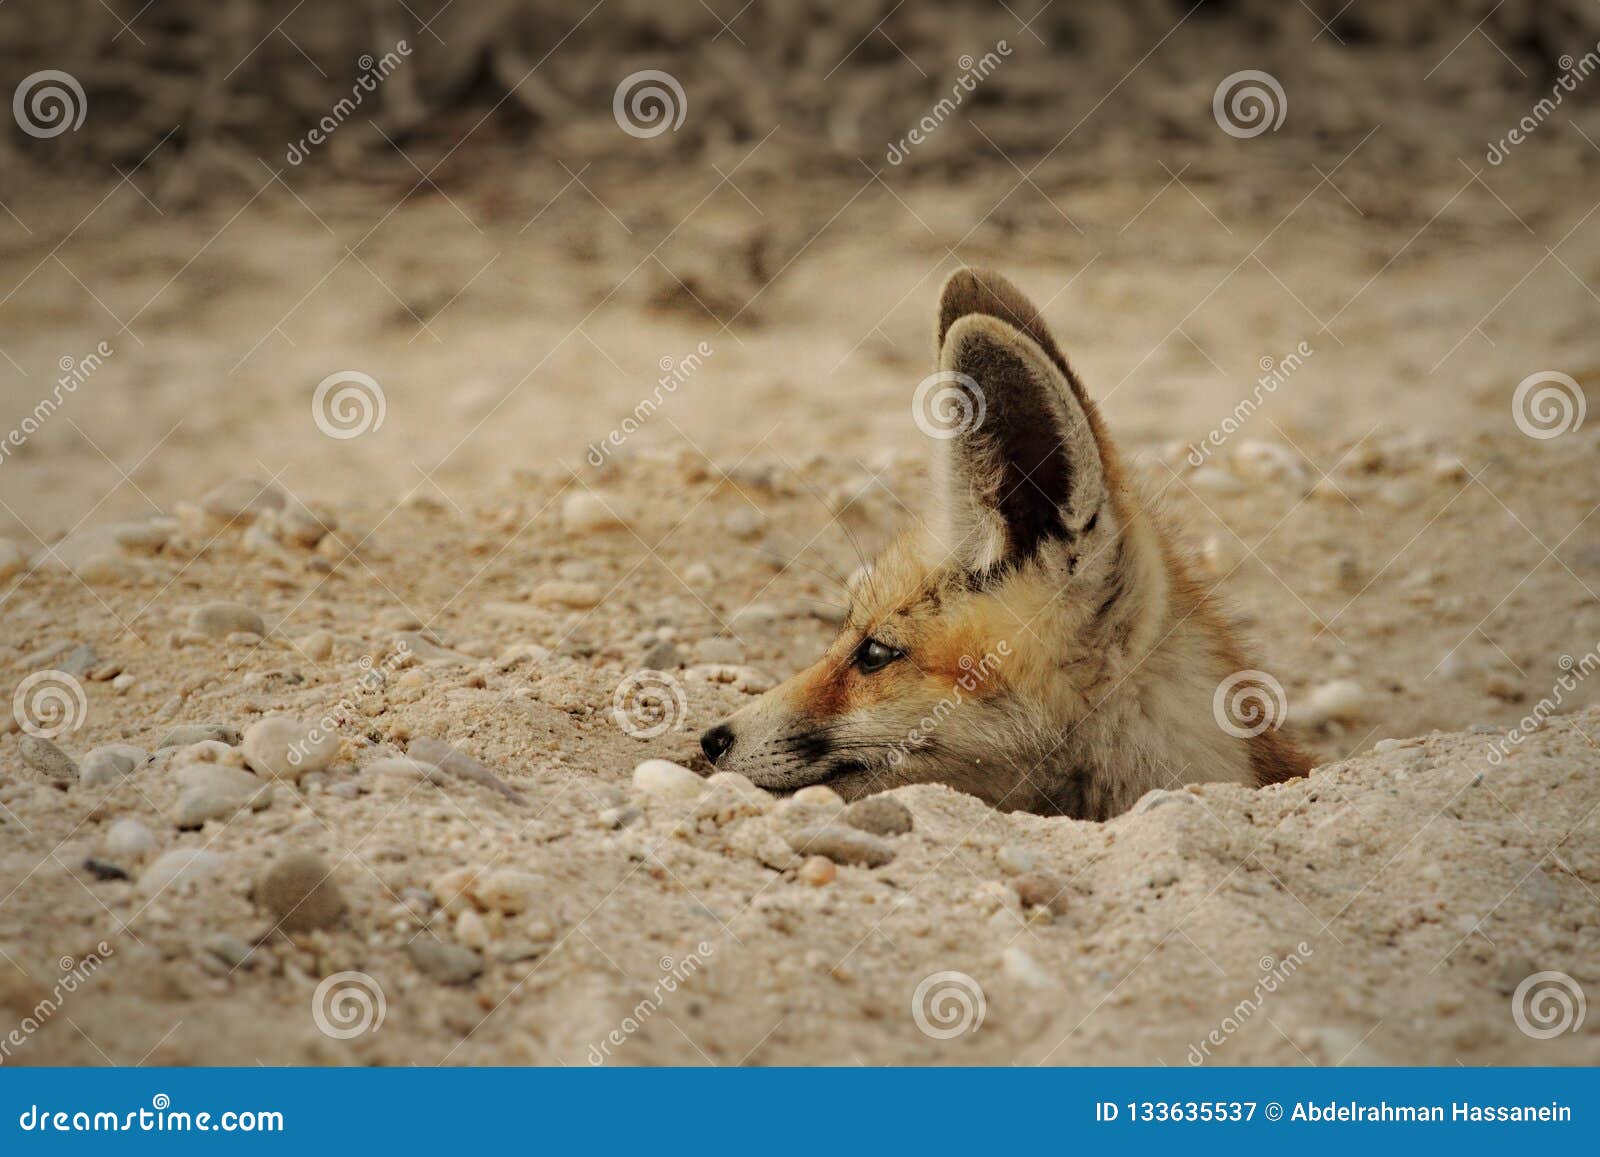 arabian-red-fox-his-den-arabian-red-fox-getting-out-his-burrow-being-attracted-food-smell-133635537.jpg